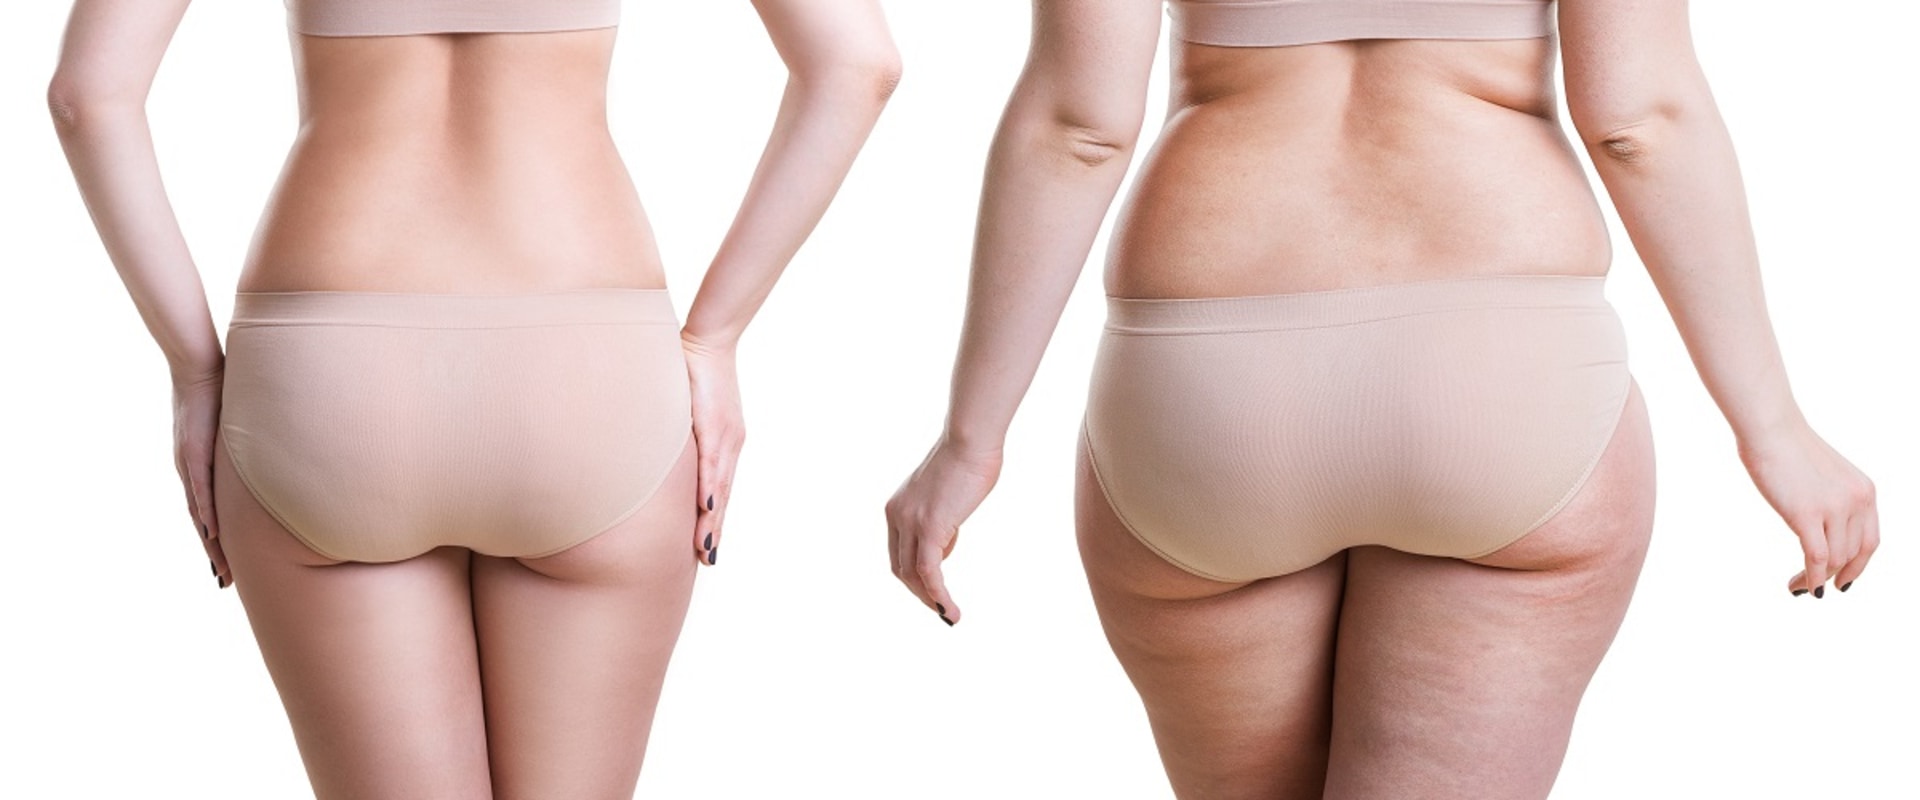 Combining Different Types of Surgical Fat Reduction Treatments for Better Results